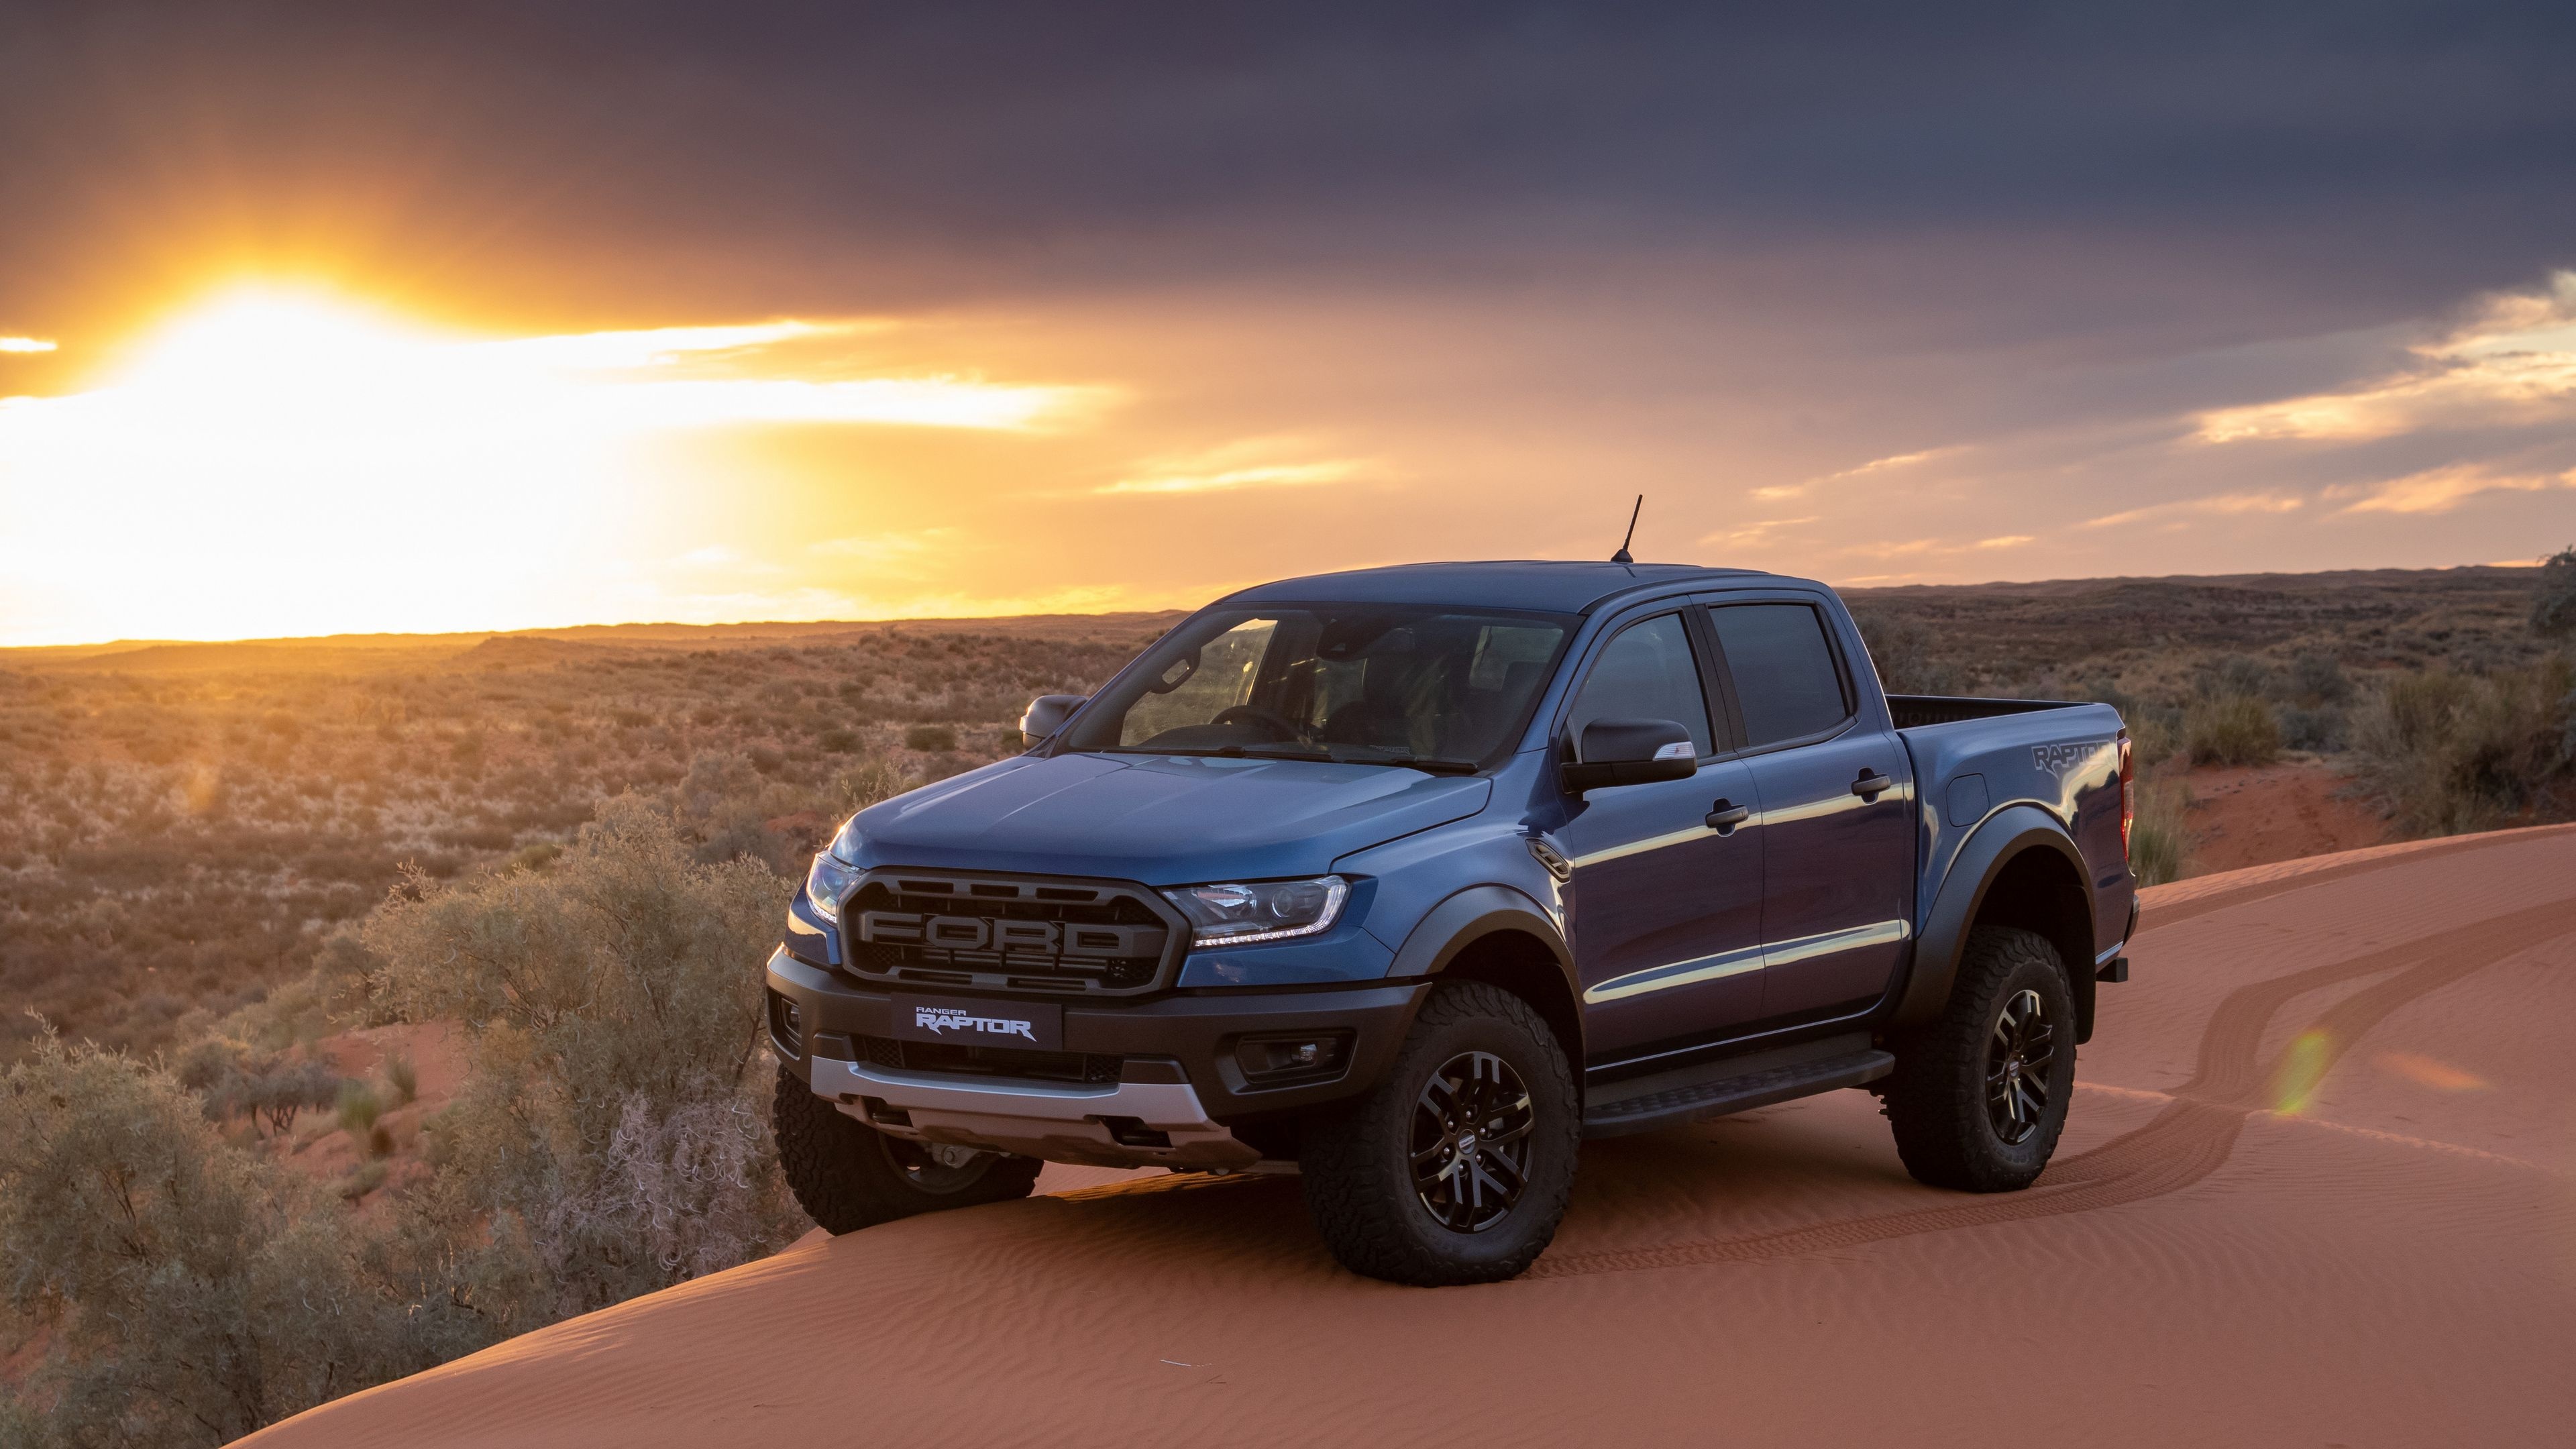 Ford Ranger: The model is slotted below the F-150 and above the Maverick in the pickup truck range. 3840x2160 4K Wallpaper.